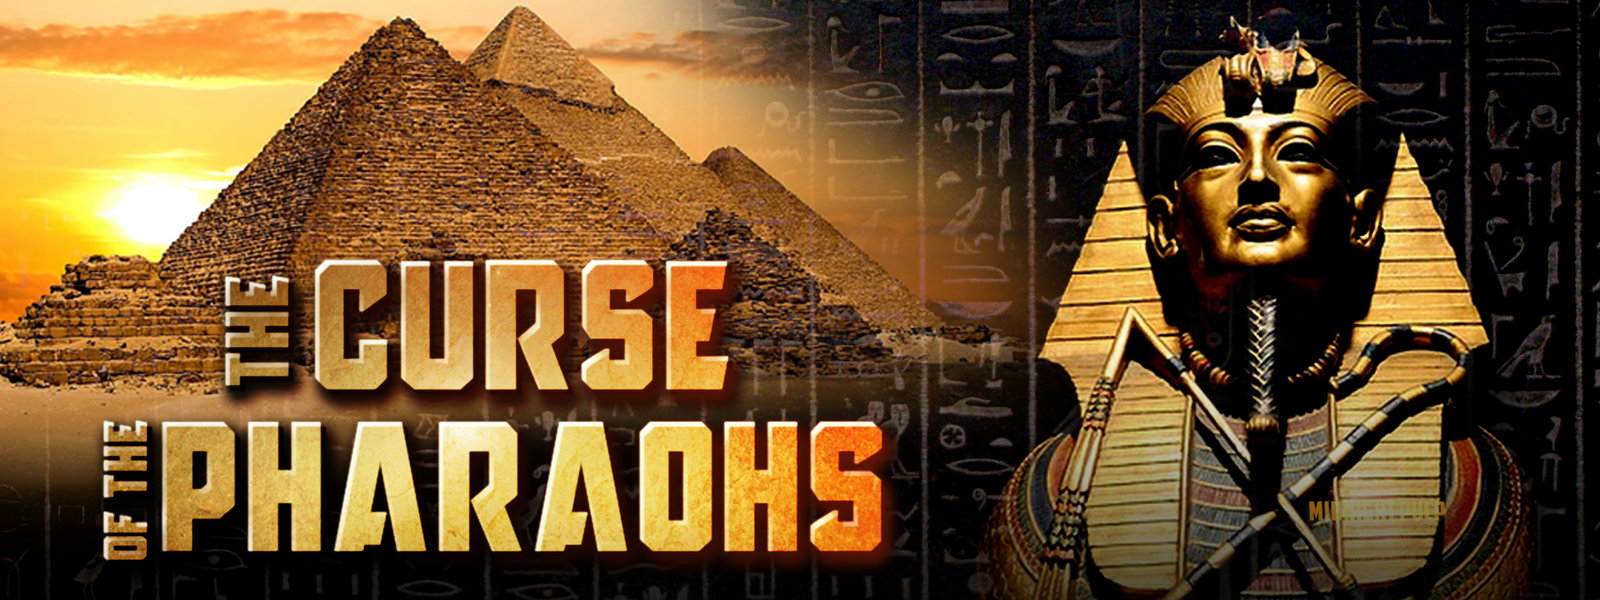 Curse of the pharaoh the quest for nefertiti hidden object precracked